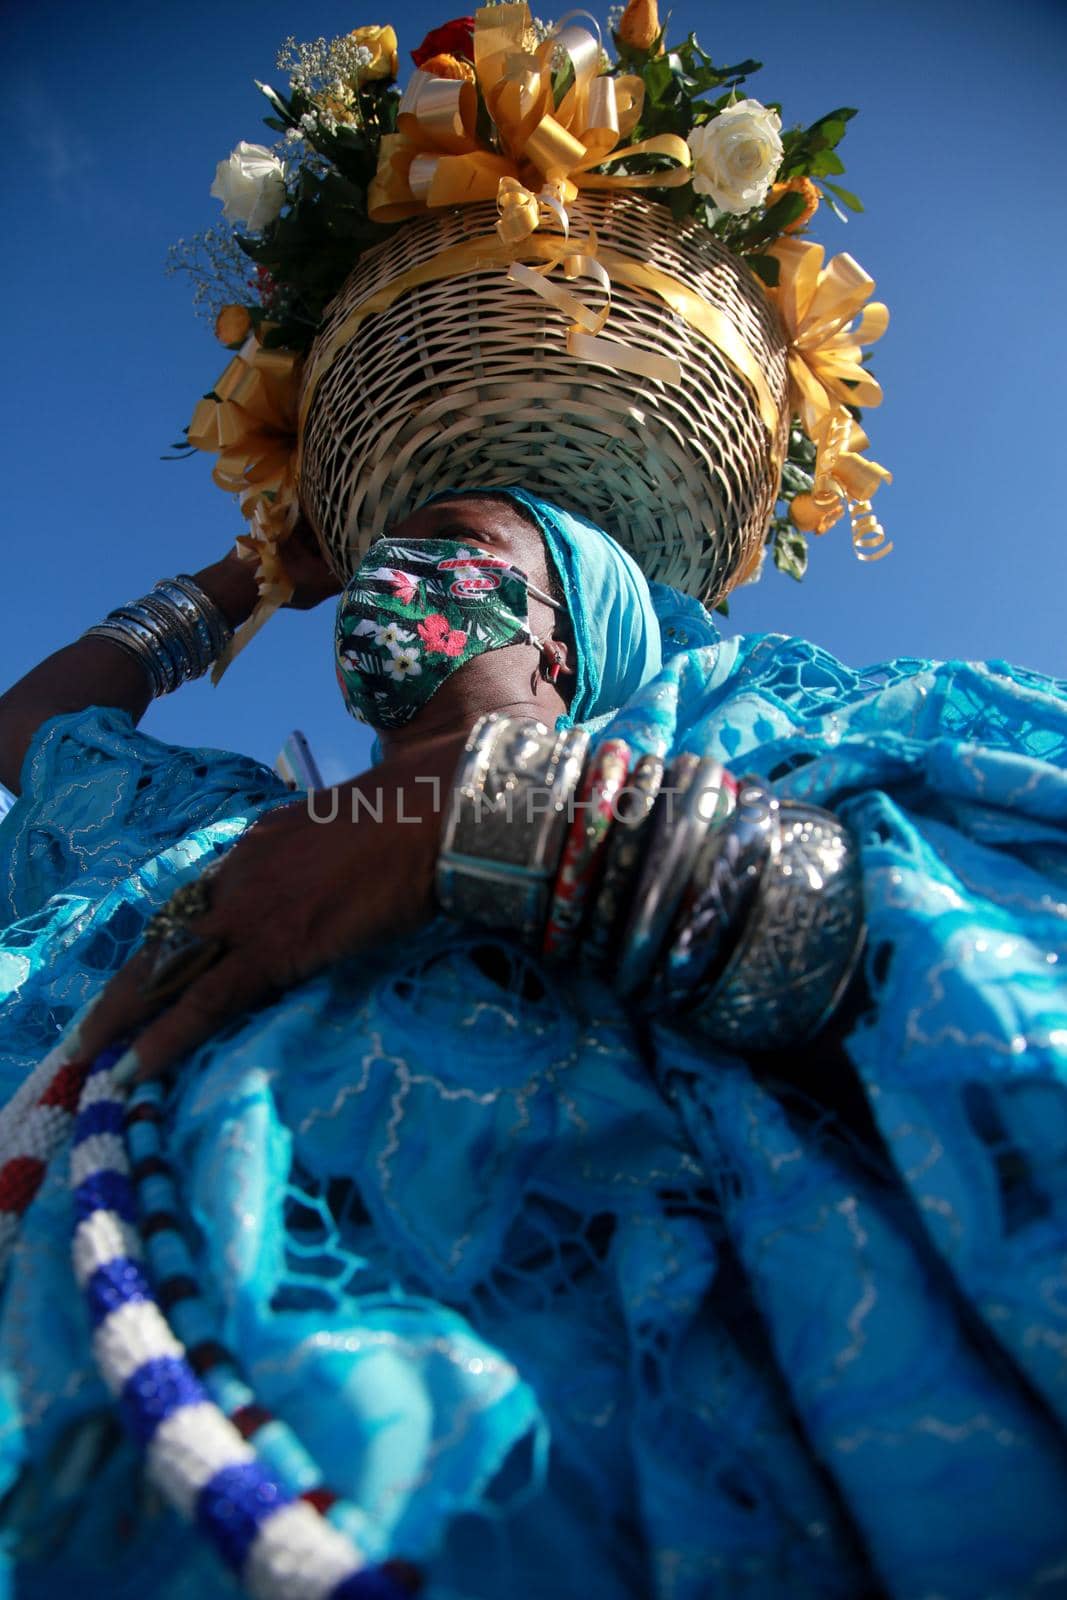 salvador, bahia, brazil - february 2, 2022: Candomble devotees and supporters of the African matriaz religion pay tribute to the orixa Yemanja in the city of Salvador.